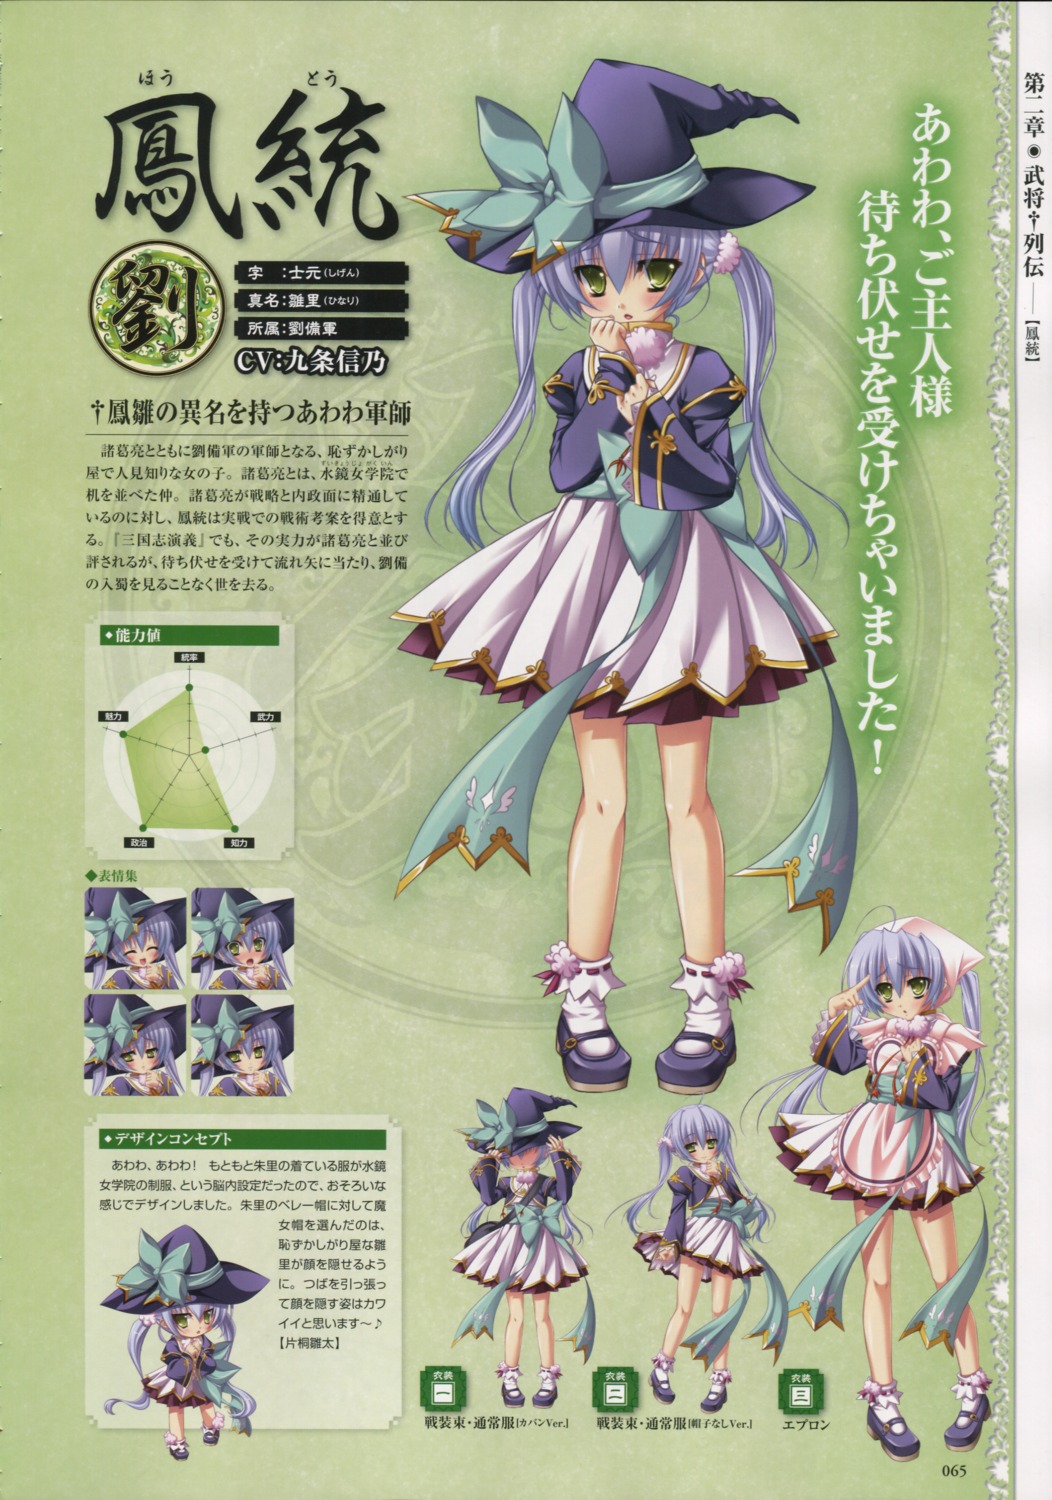 baseson character_design chibi expression houtou koihime_musou maid profile_page witch